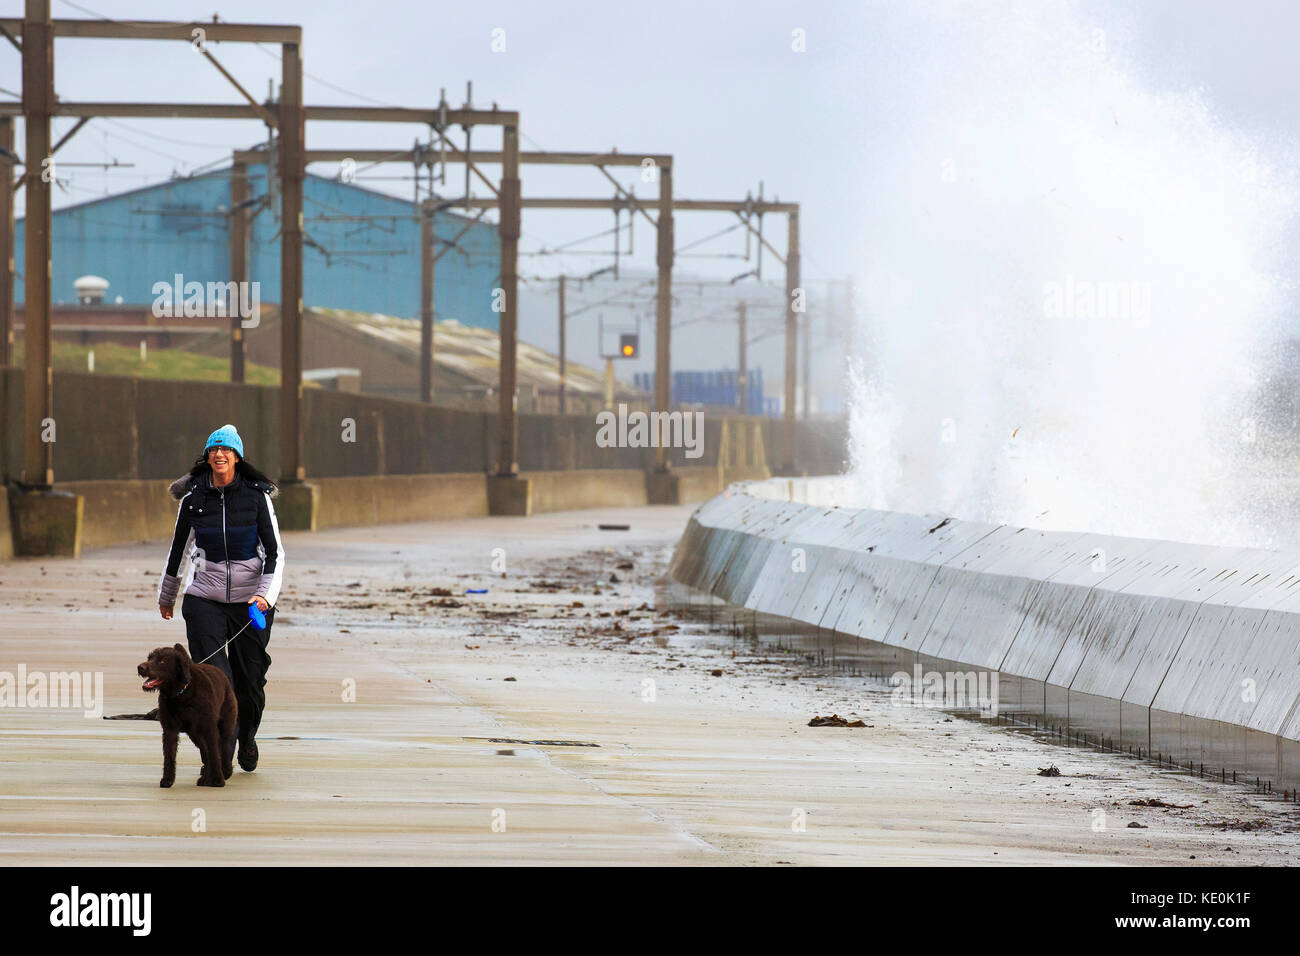 Life gets back to normal on the day after Hurricane Ophelia struck the west coast of Scotland with winds gusting up to 80 mph and as winds continue to cause high waves and stormy conditions, locals in Saltcoats, Ayrshire get on with their regular dog walking. Stock Photo